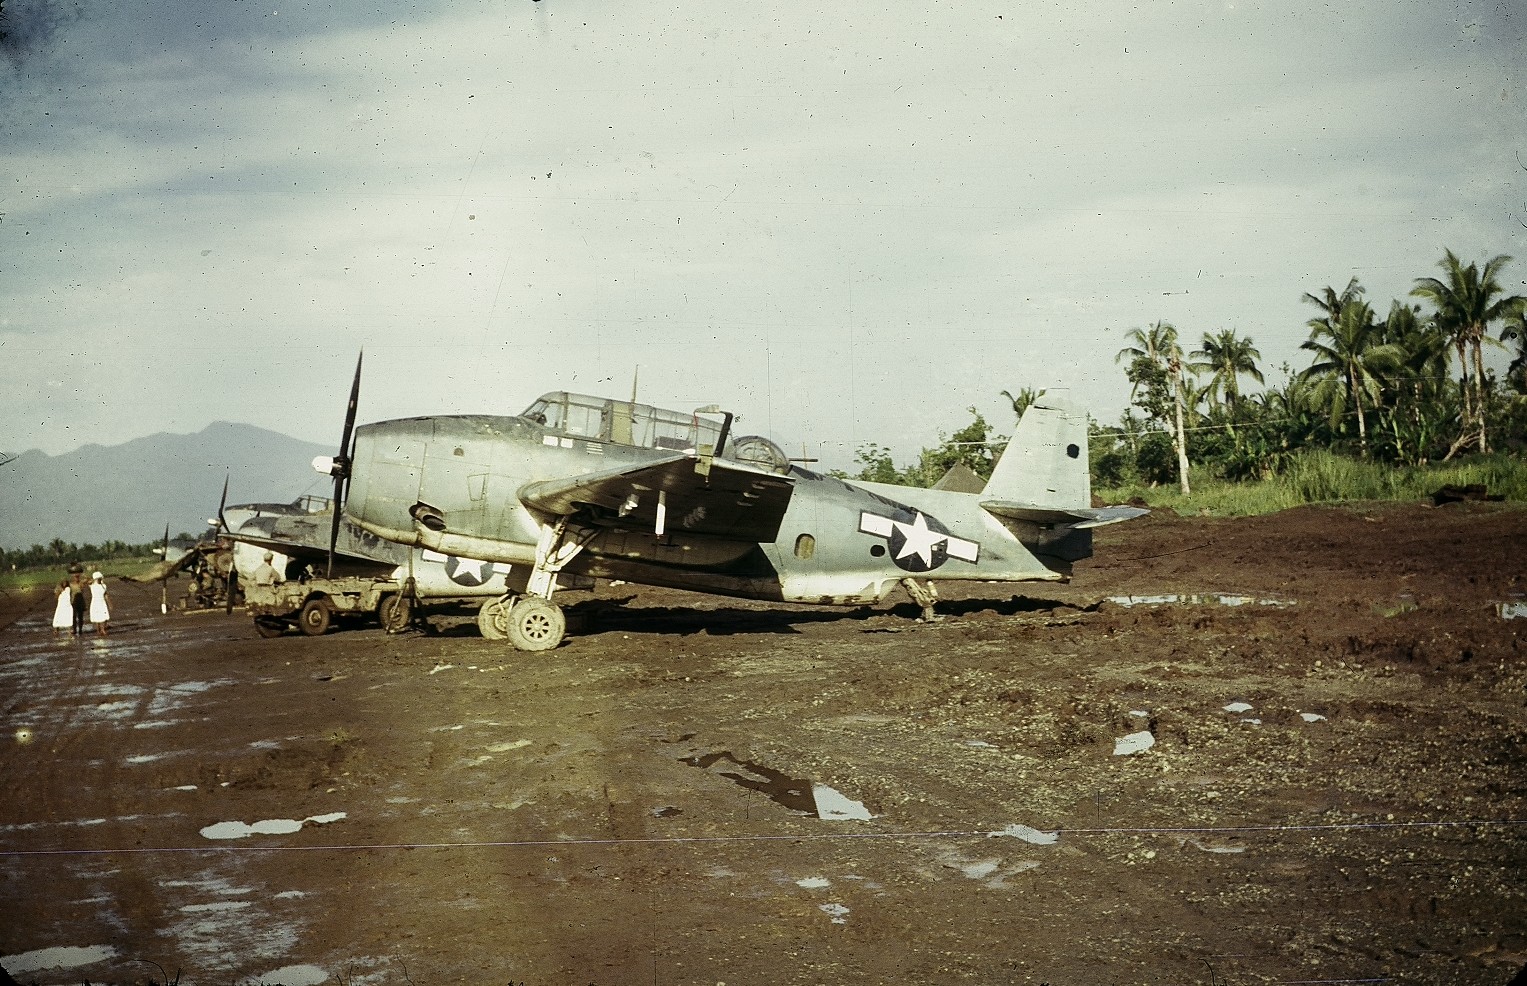 TBM-1C Avengers and an F4F Wildcat, probably with Marine squadrons, lined up at Dulag airstrip, Leyte, Philippines in late 1944 or early 1945.